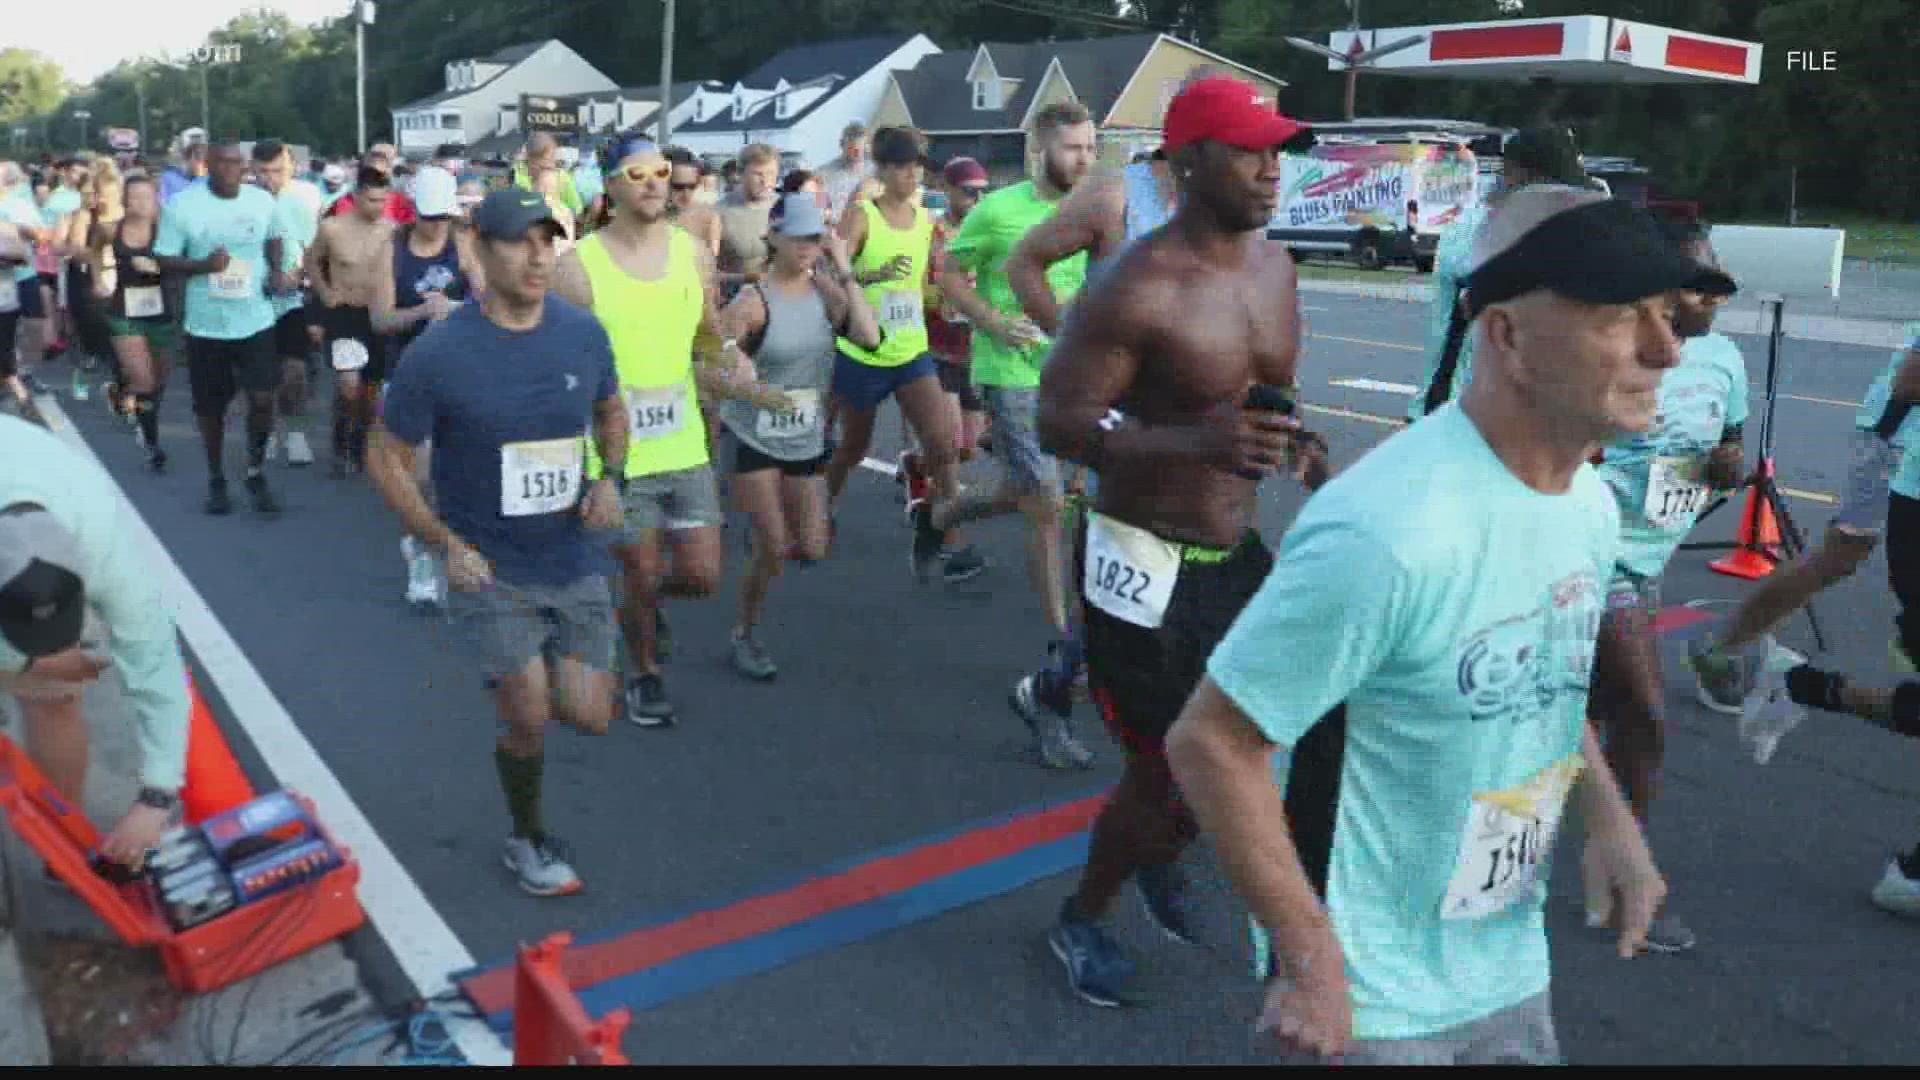 This race serves as a qualifier for next year's Peachtree Road Race.